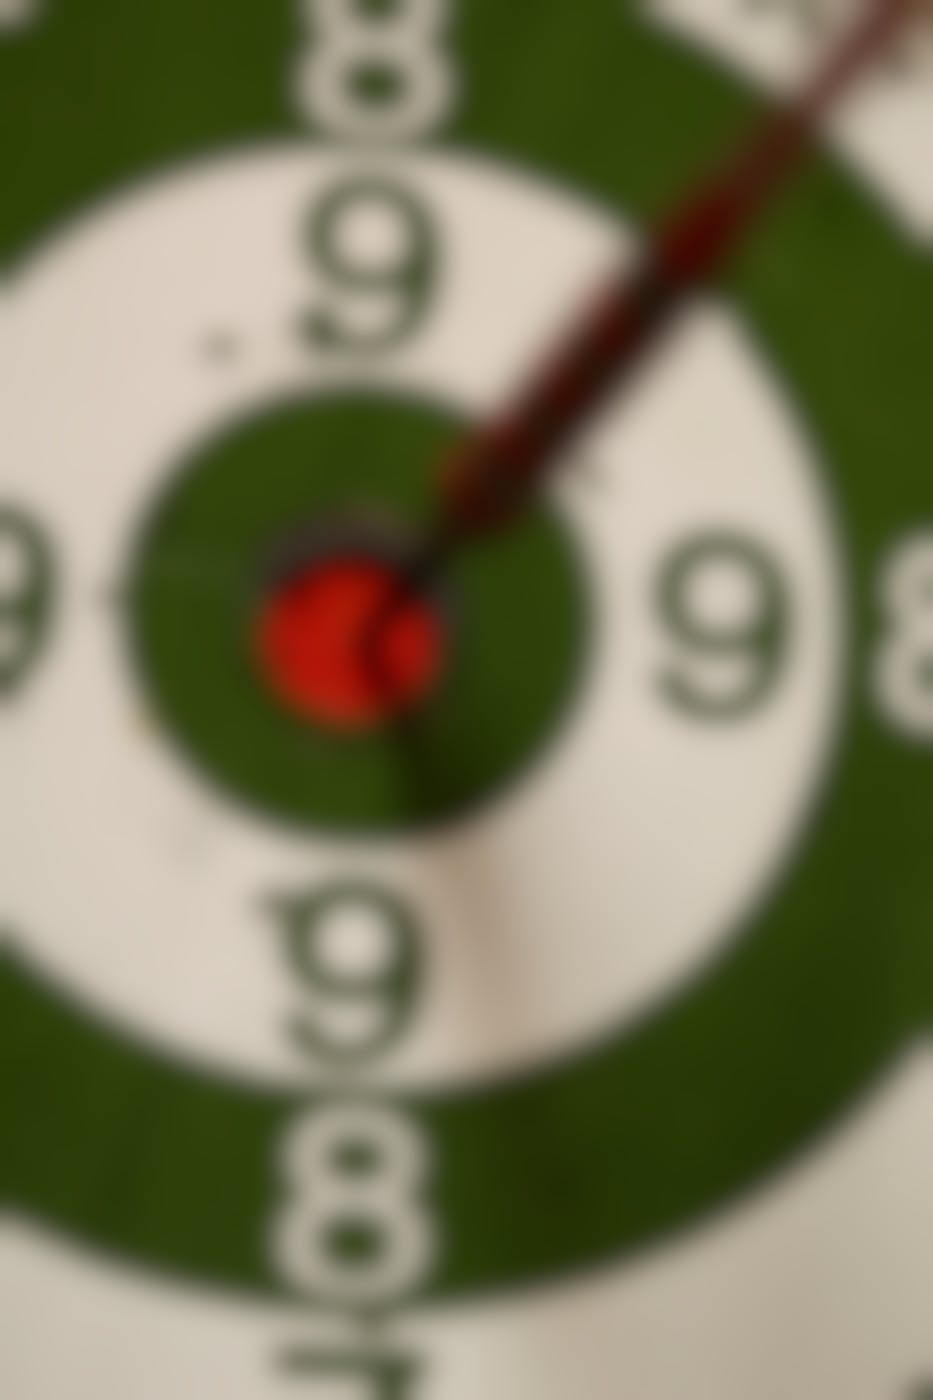 Close up on a dart board with a dart in the bullseye